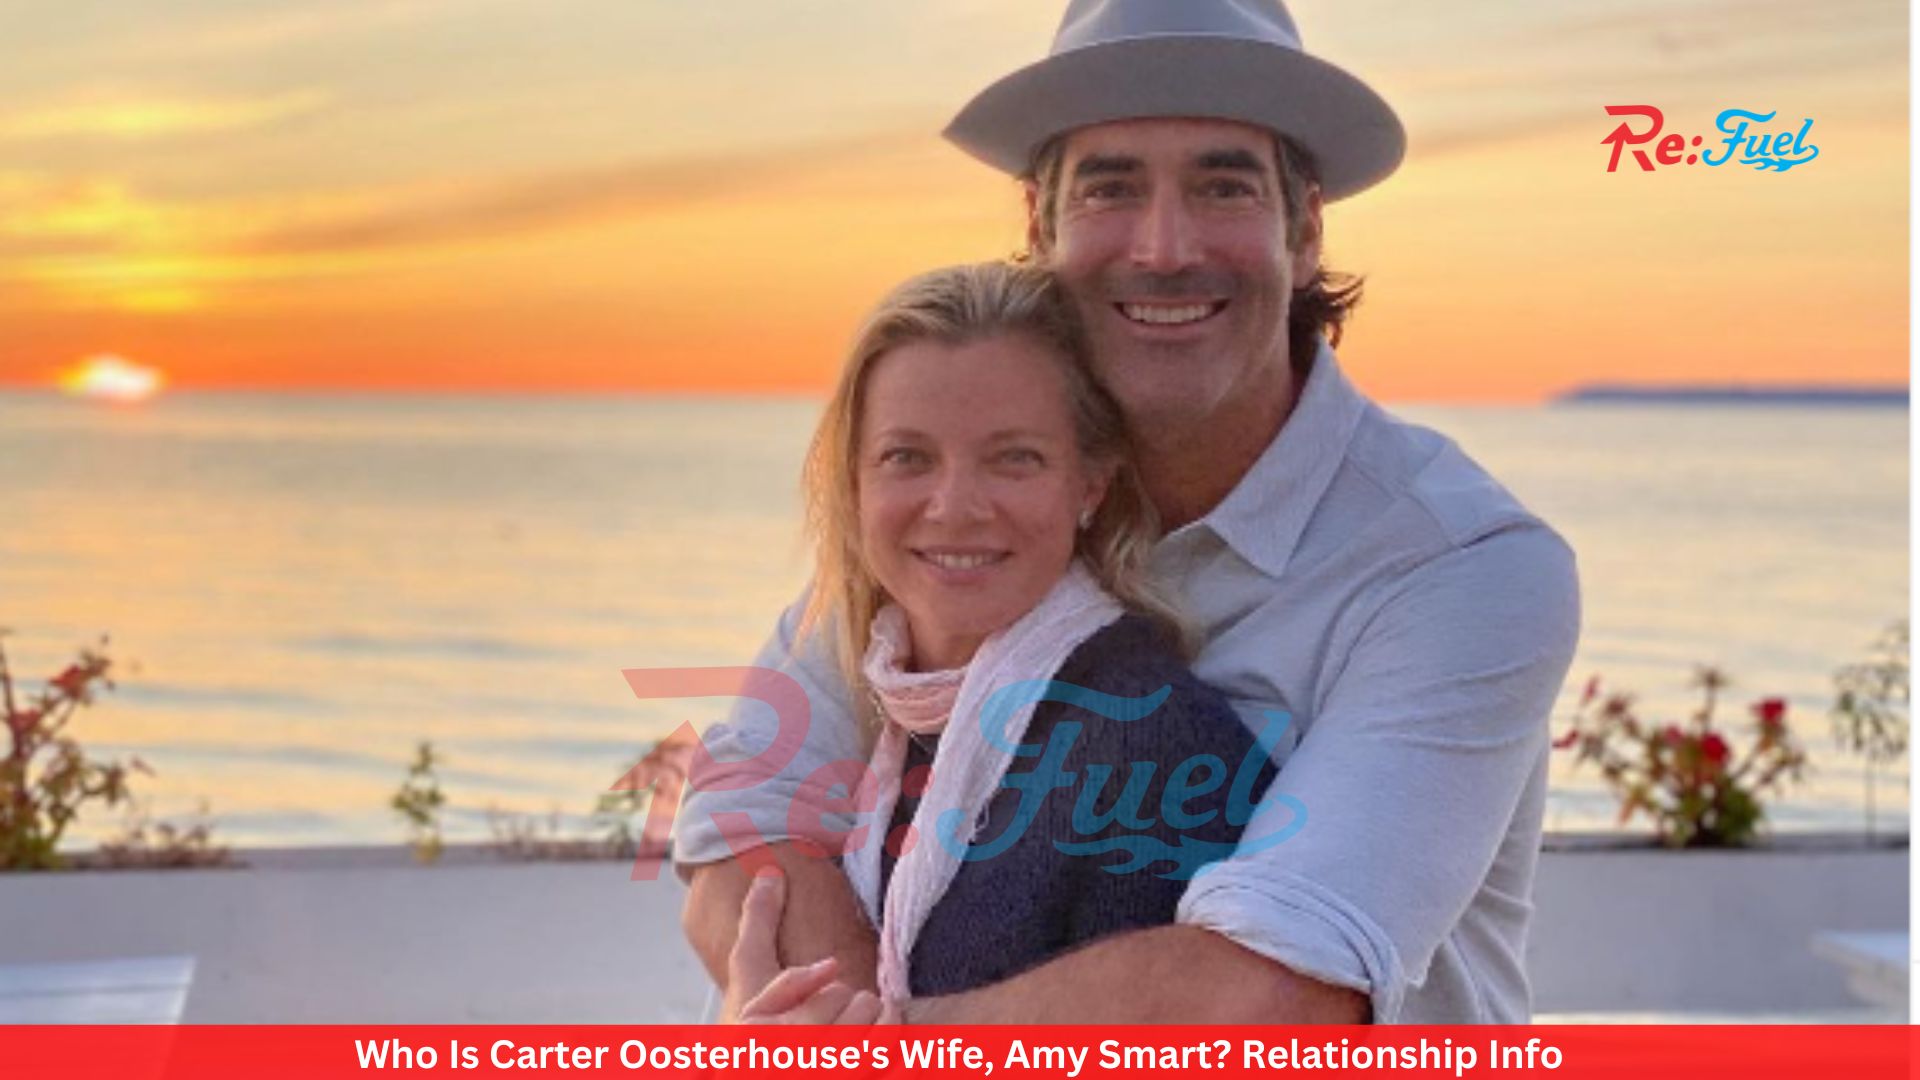 Who Is Carter Oosterhouse's Wife, Amy Smart? Relationship Info